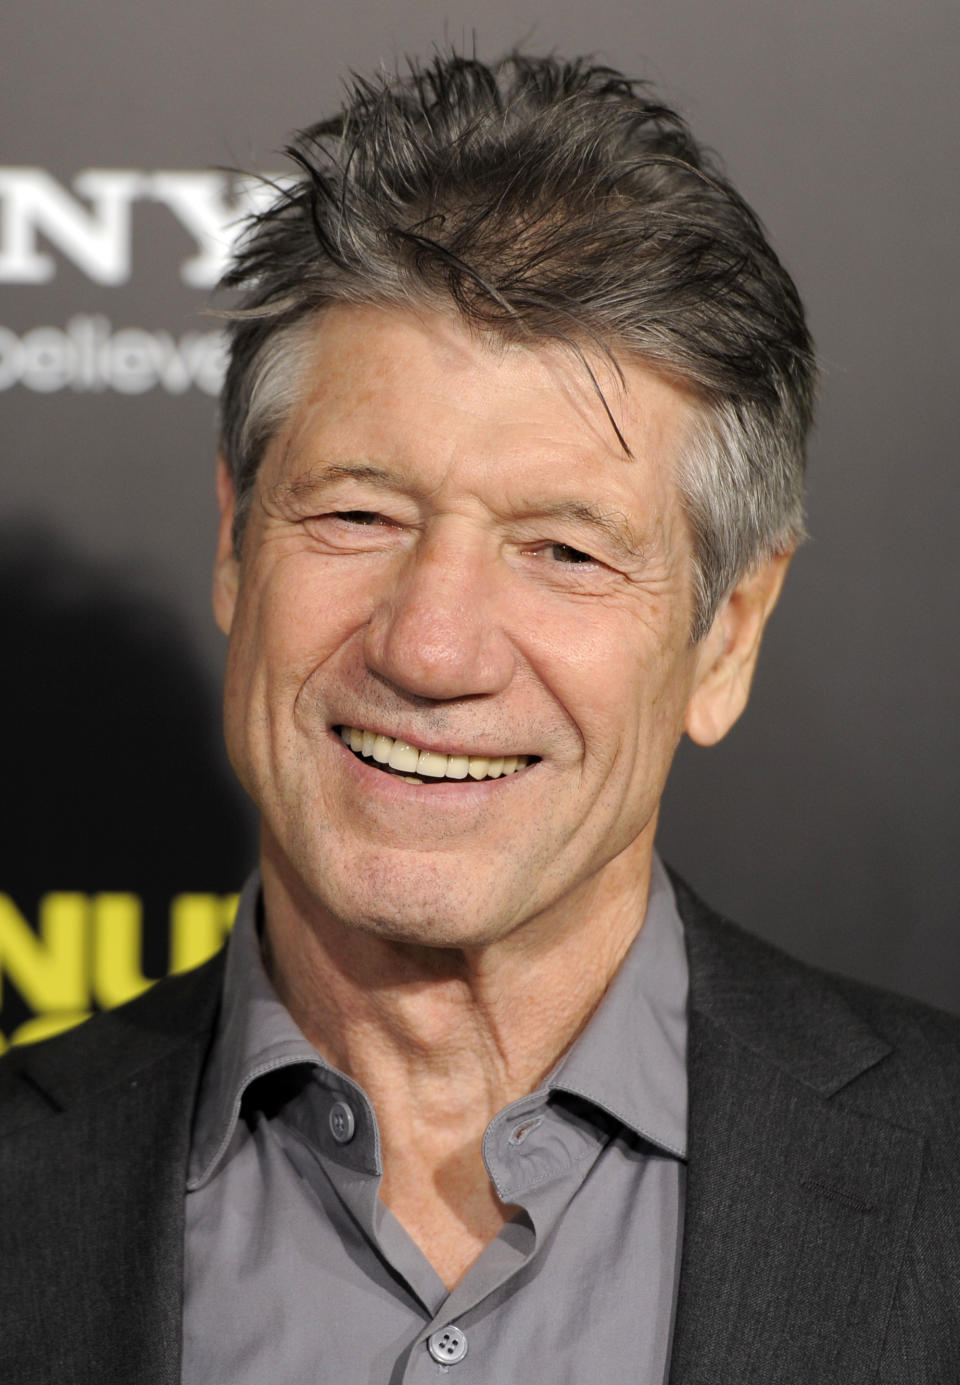 FILE - Fred Ward, a cast member in "30 Minutes or Less," poses at the premiere of the film in Los Angeles on Aug. 8, 2011. Ward, a veteran actor who brought a gruff tenderness to tough-guy roles in such films as “The Right Stuff,” “The Player” and “Tremors,” died Sunday, May 8, his publicist Ron Hofmann said Friday, May 13, 2022. He was 79. (AP Photo/Chris Pizzello, File)